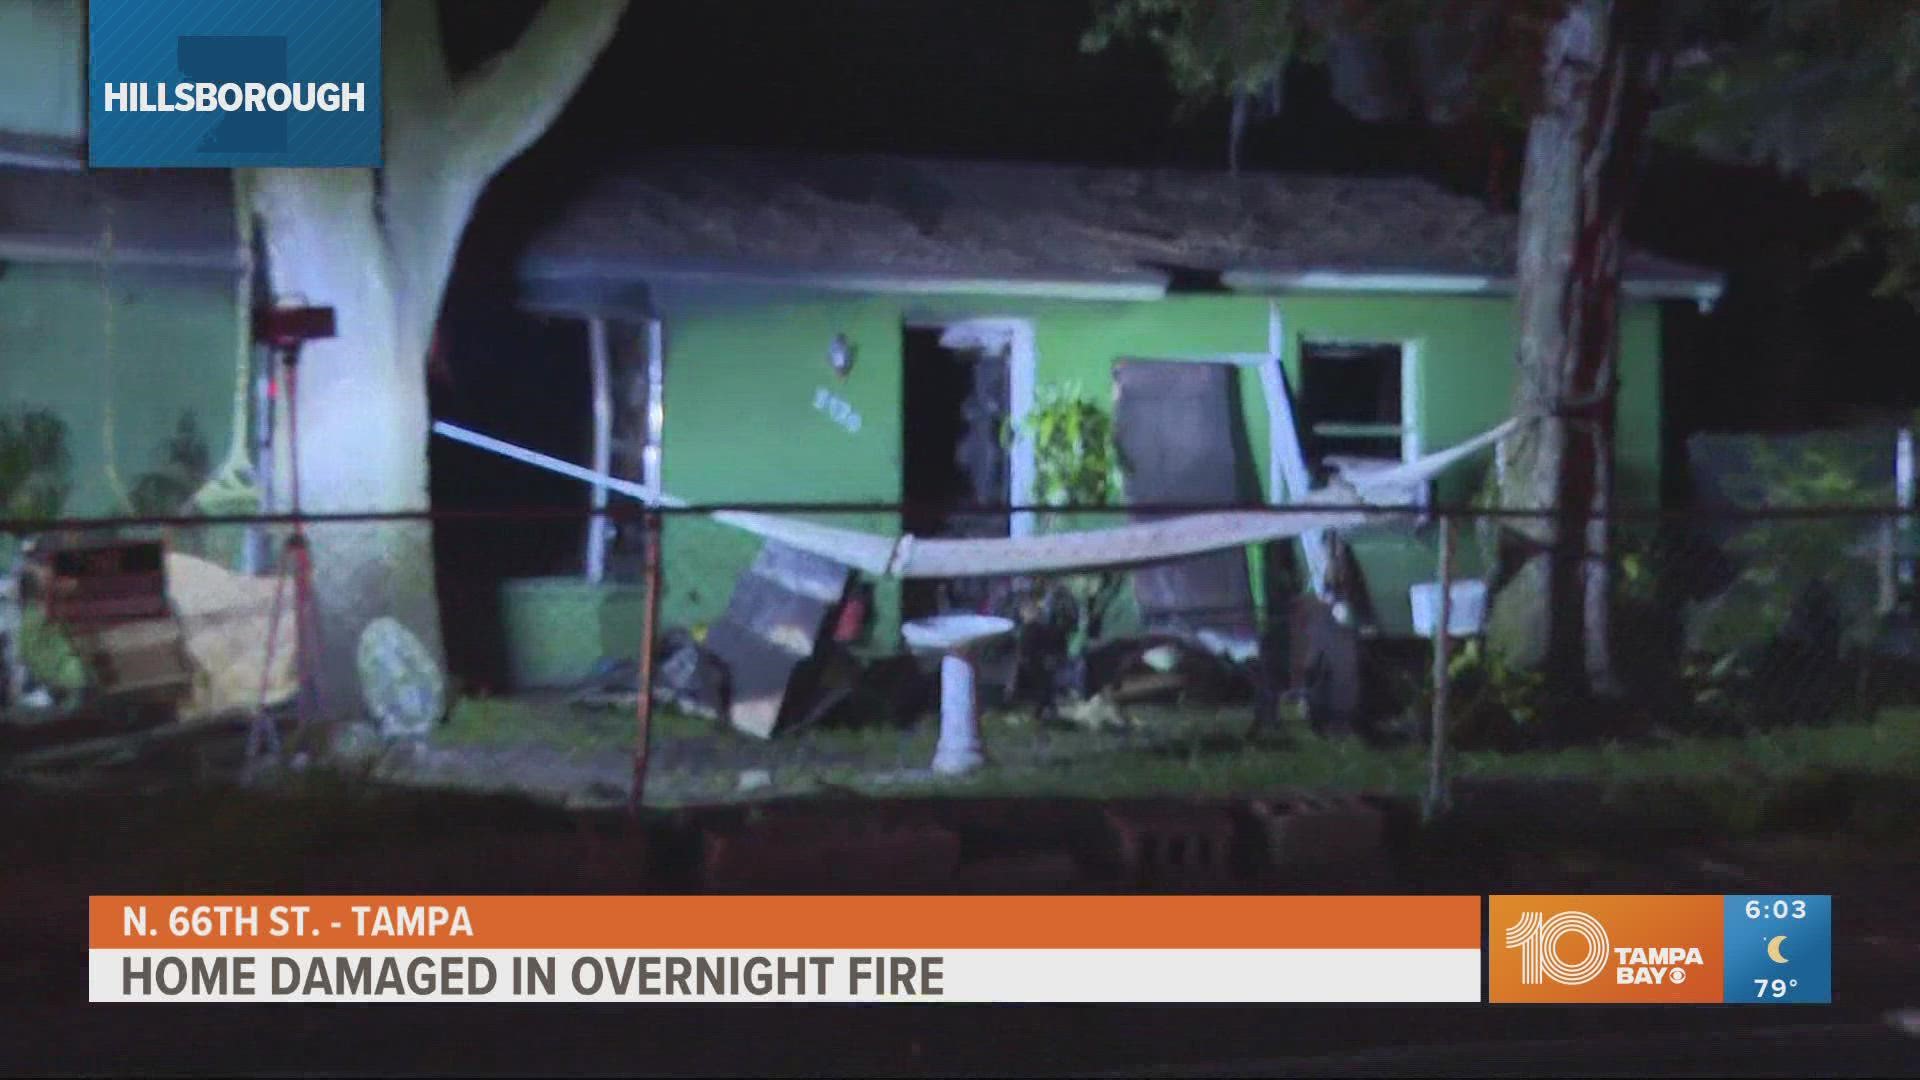 Hillsborough County Fire Rescue said no one was hurt and the fire is under investigation.